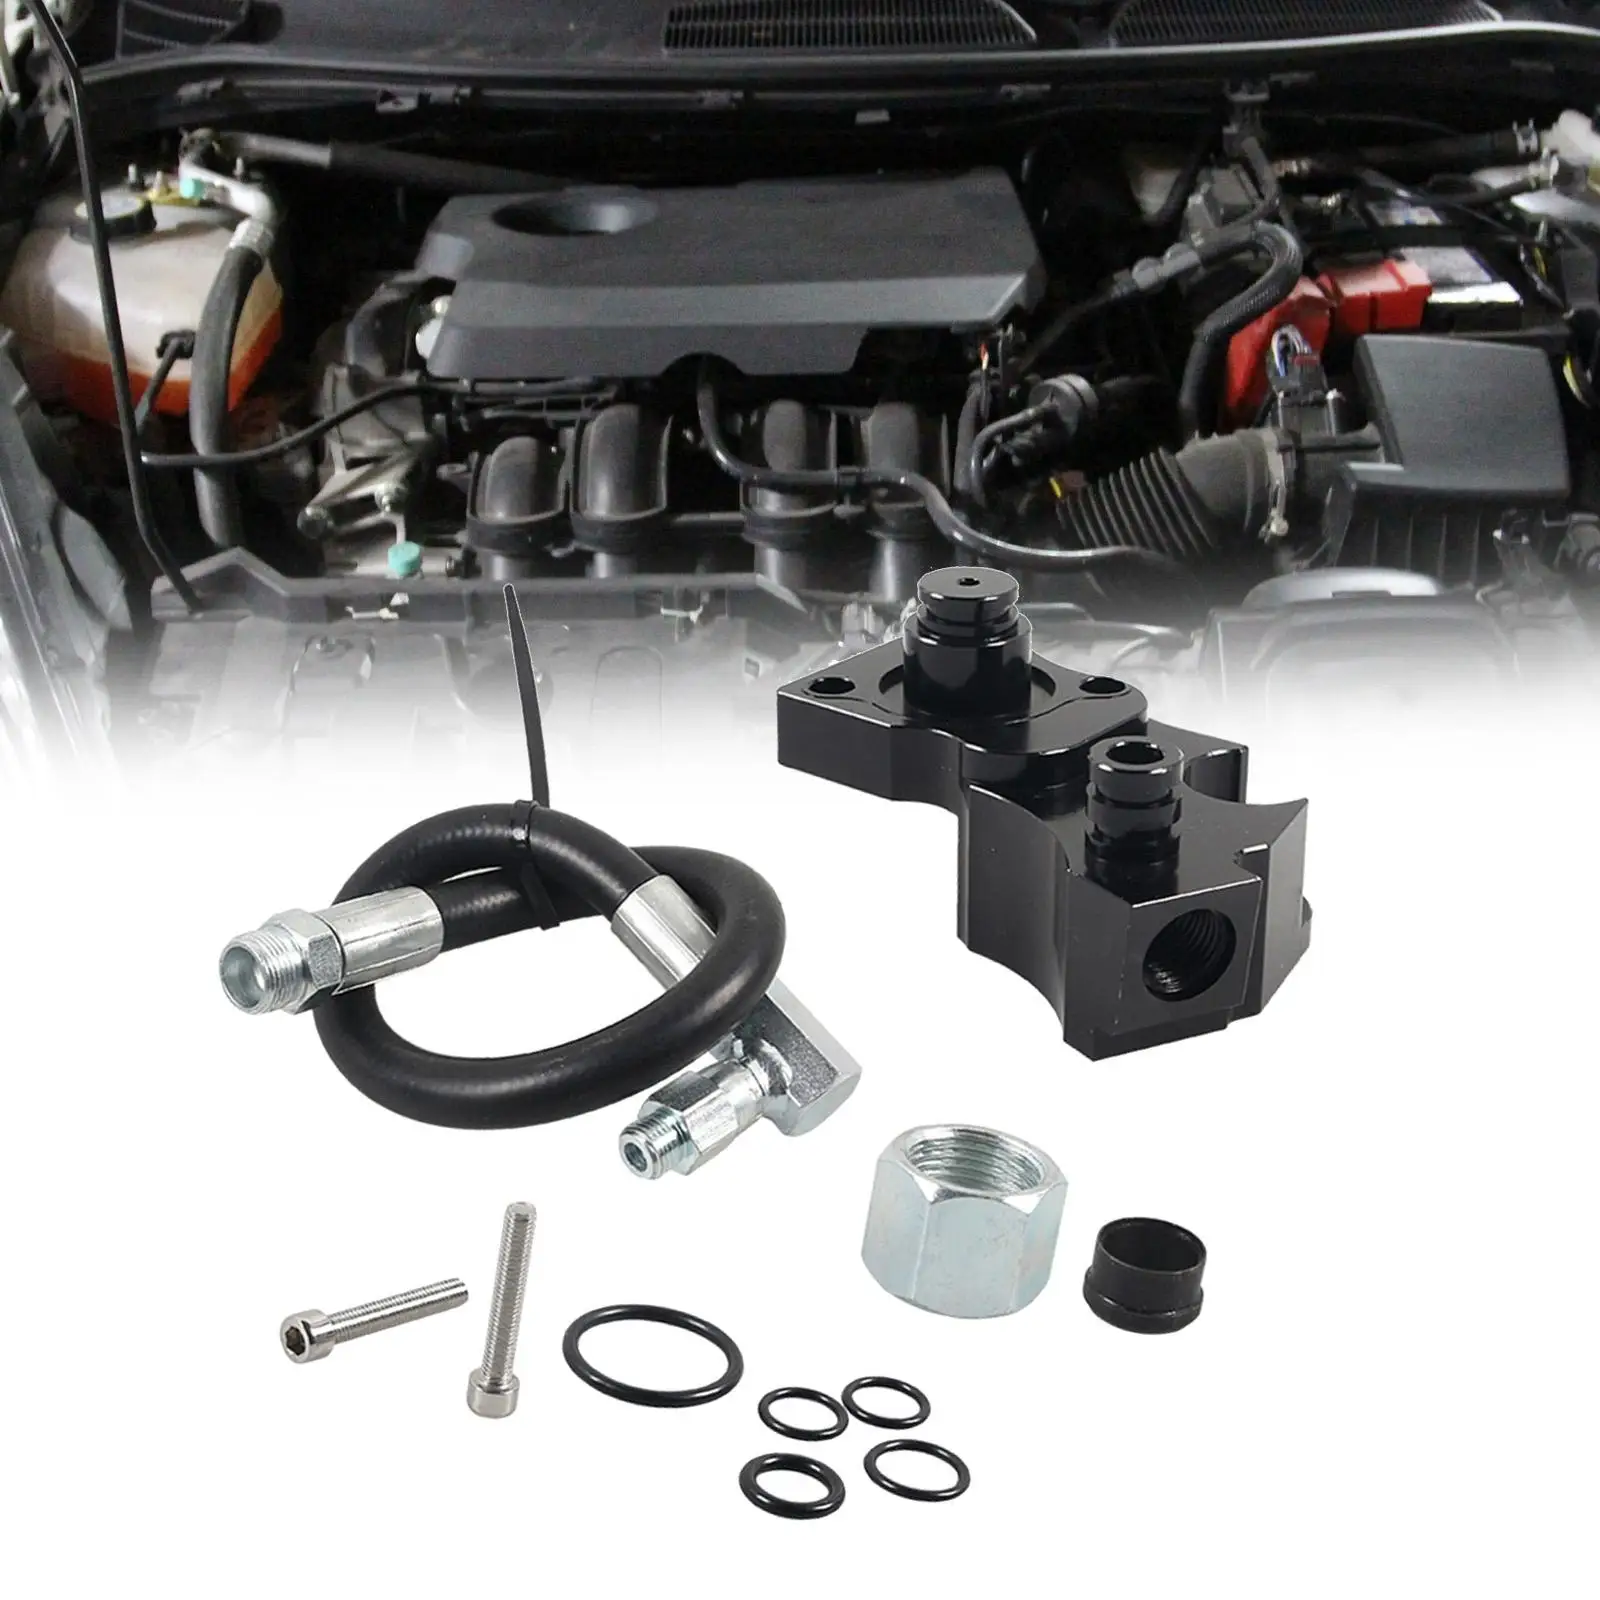 CP4 Disaster Prevention Bypass Kit Assembly Diesel CP4 Disaster Prevention Bypass Kit for Ford Powerstroke 6.7L Diesel